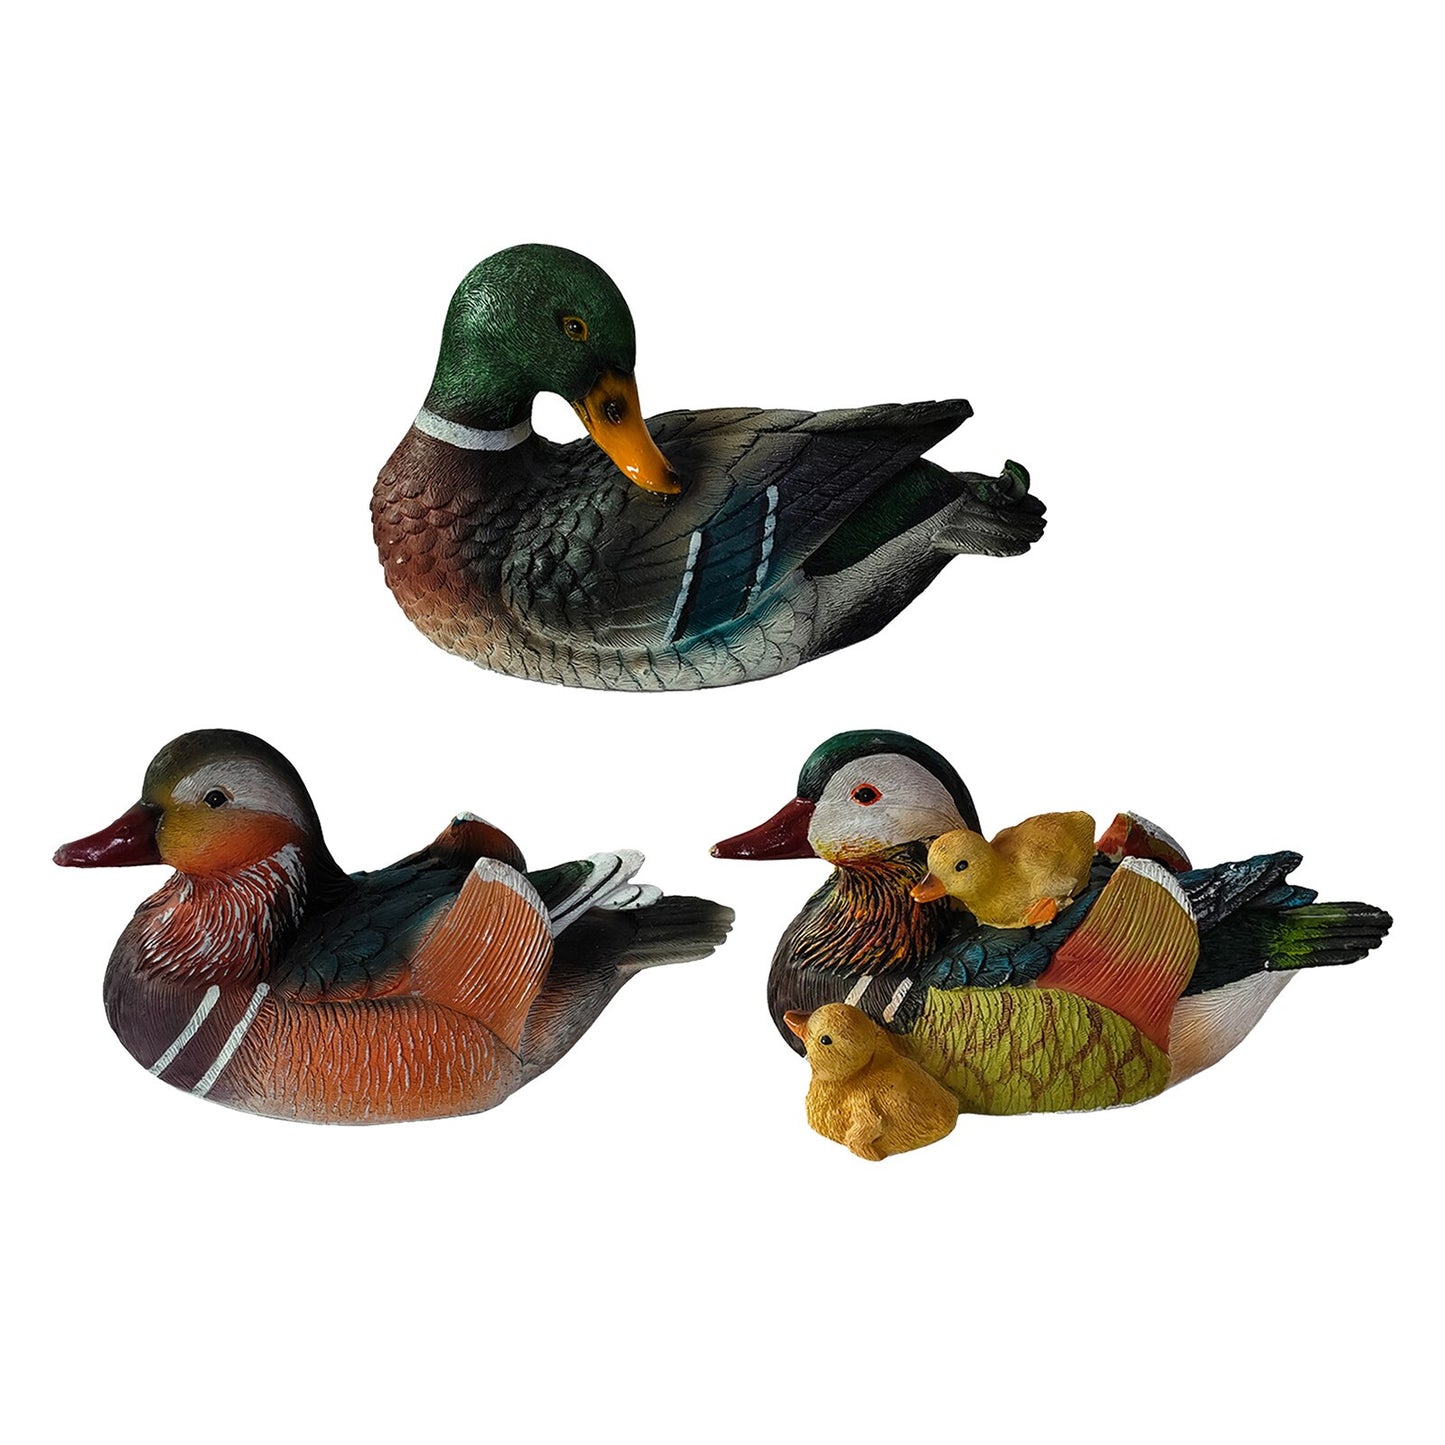 Artificial Resin Mandarin Duck Figurine Hunting Decoy Pool Pond Decors Courtyards Ornaments Duck Statue Sculpture